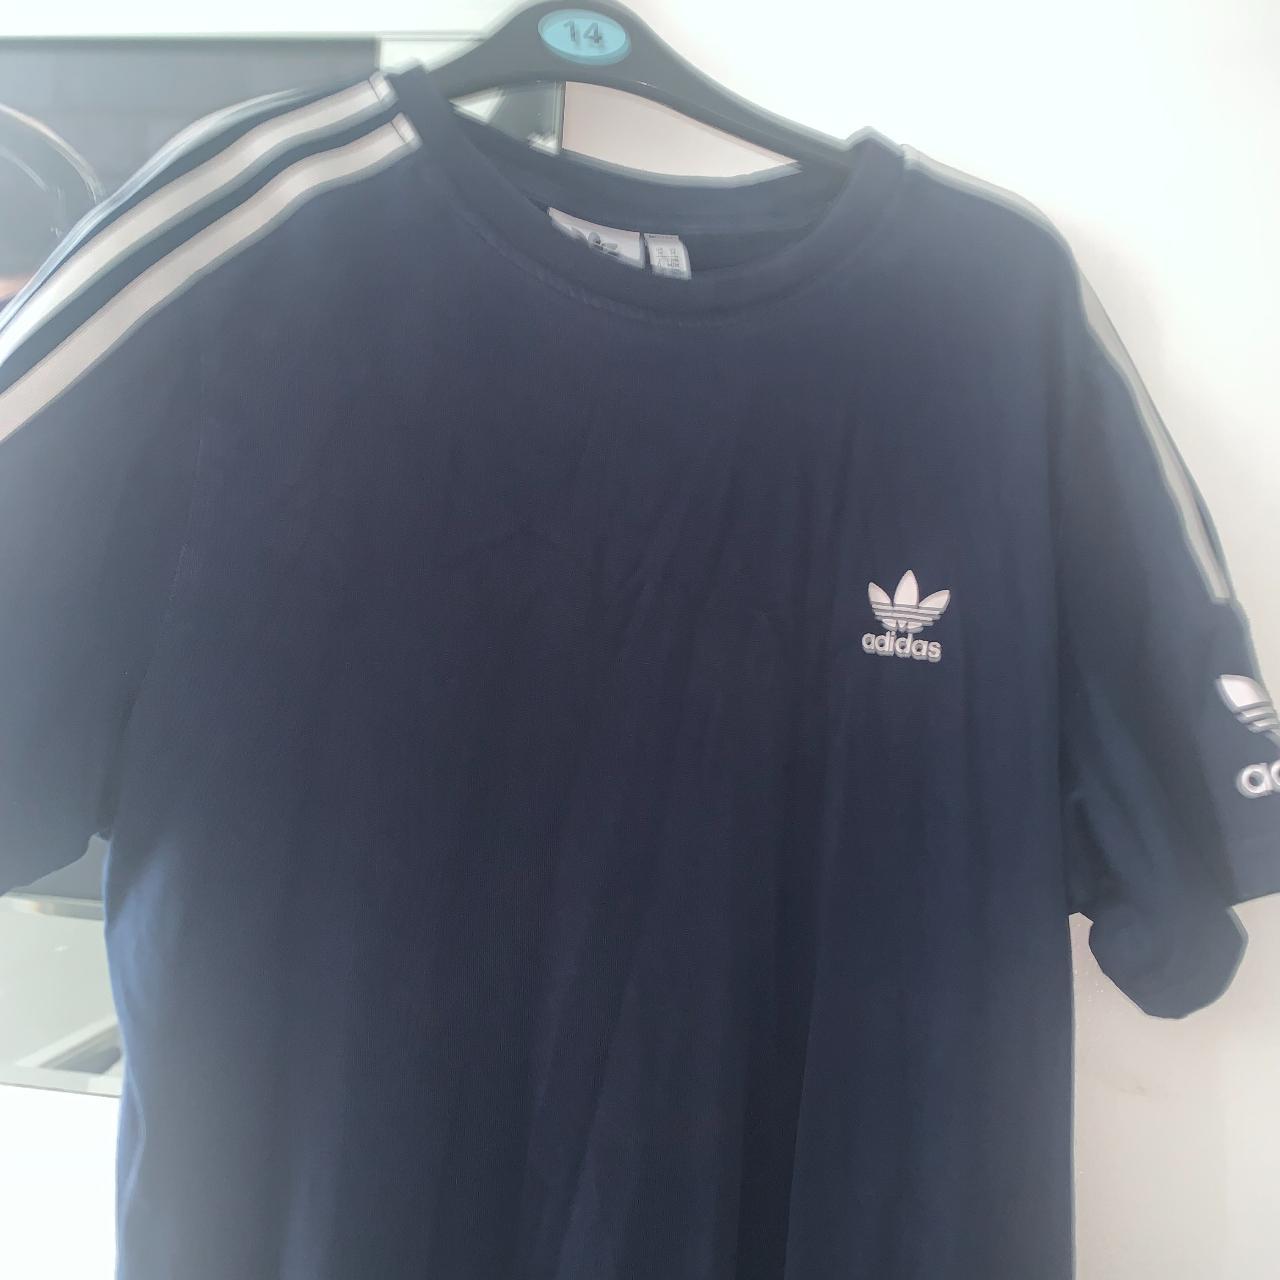 Navy Blue Adidas T-Shirt with White Stripes Been... - Depop